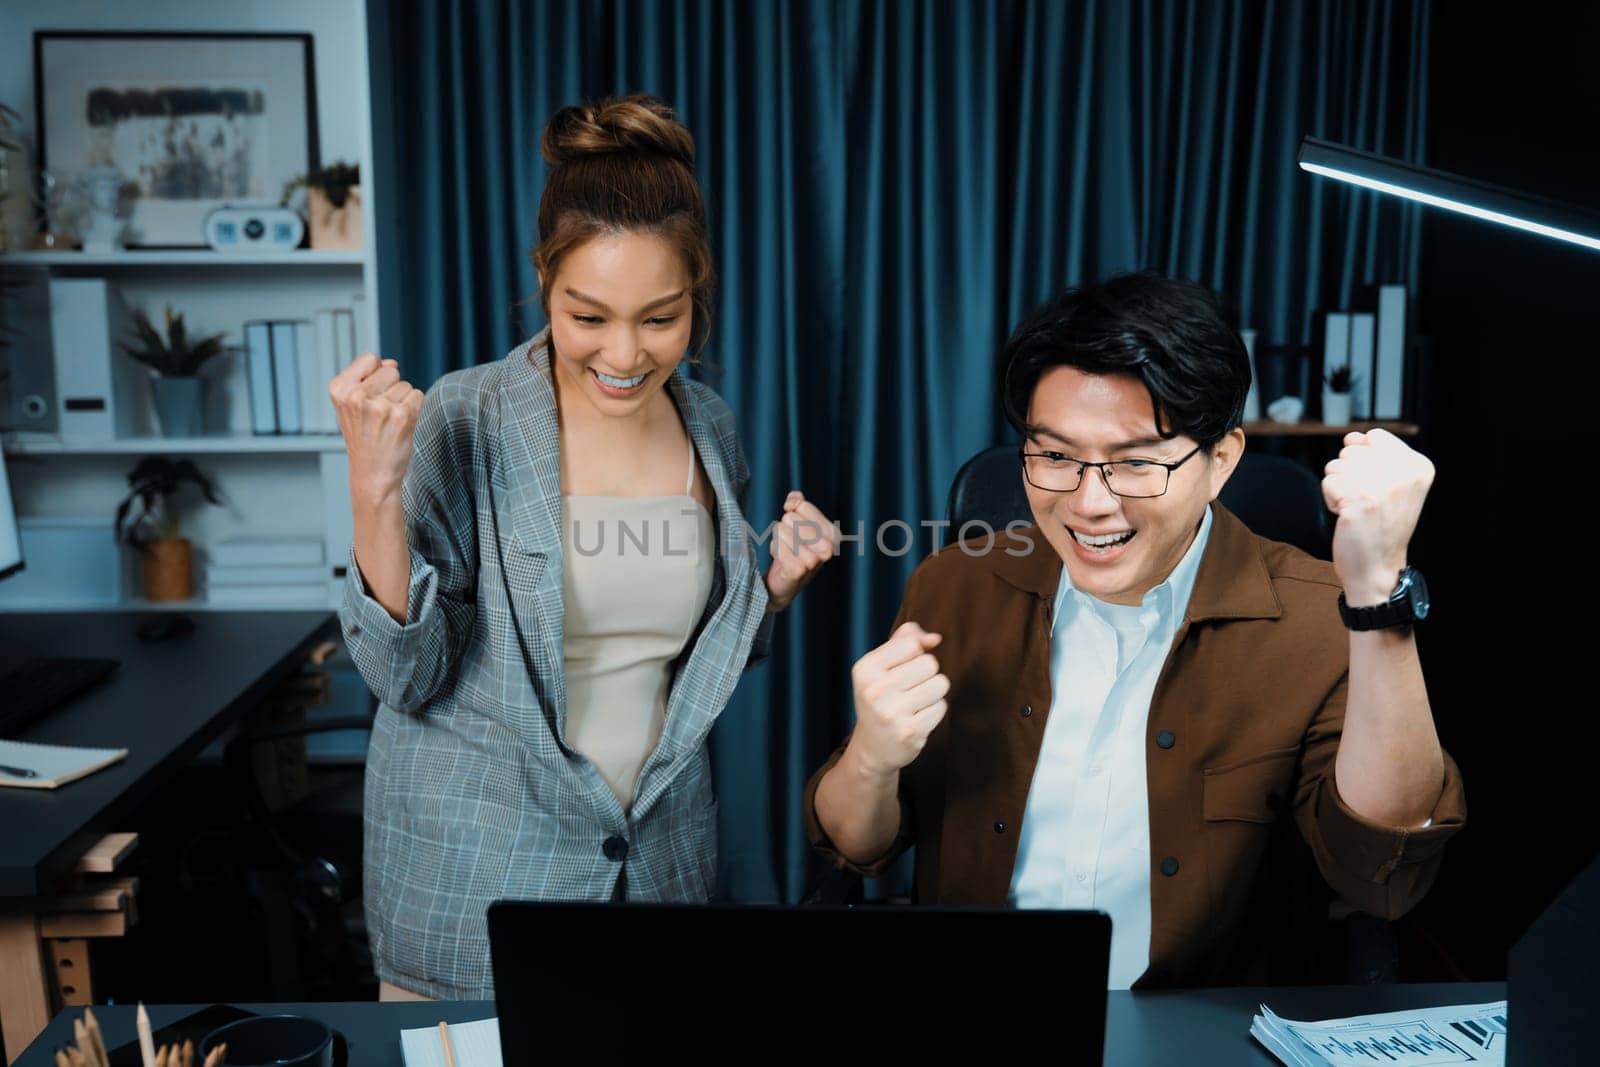 Successful smiling business partners earning high revenue in sales raising fist up in creative design architecture planning project job investment via email at modern home office at night. Infobahn.